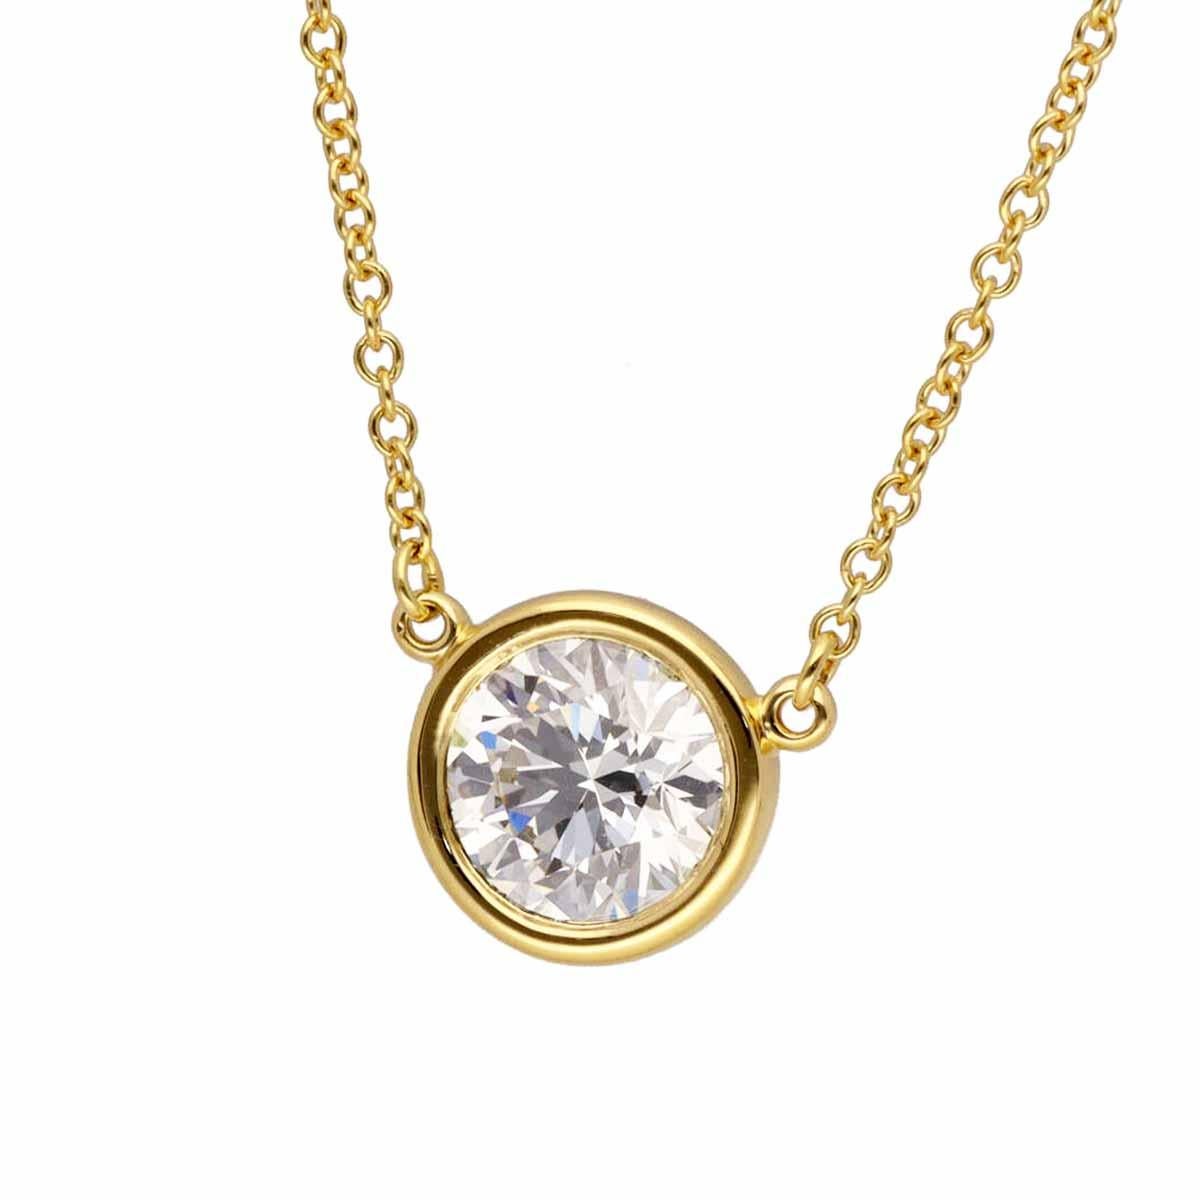 Brand:TIFFANY&Co
Name:Diamond by the Yard Single Diamond Pendant Necklace
Material:1P Diamond (1.03ct H-VVS1-3Ex), 750 K18 YG Yellow Gold
Weight:2.3g（Approx）
neck around 	: 41cm / 16.14in（Approx）
Top size:8.24mm / 0.32in（Approx）
Main stone